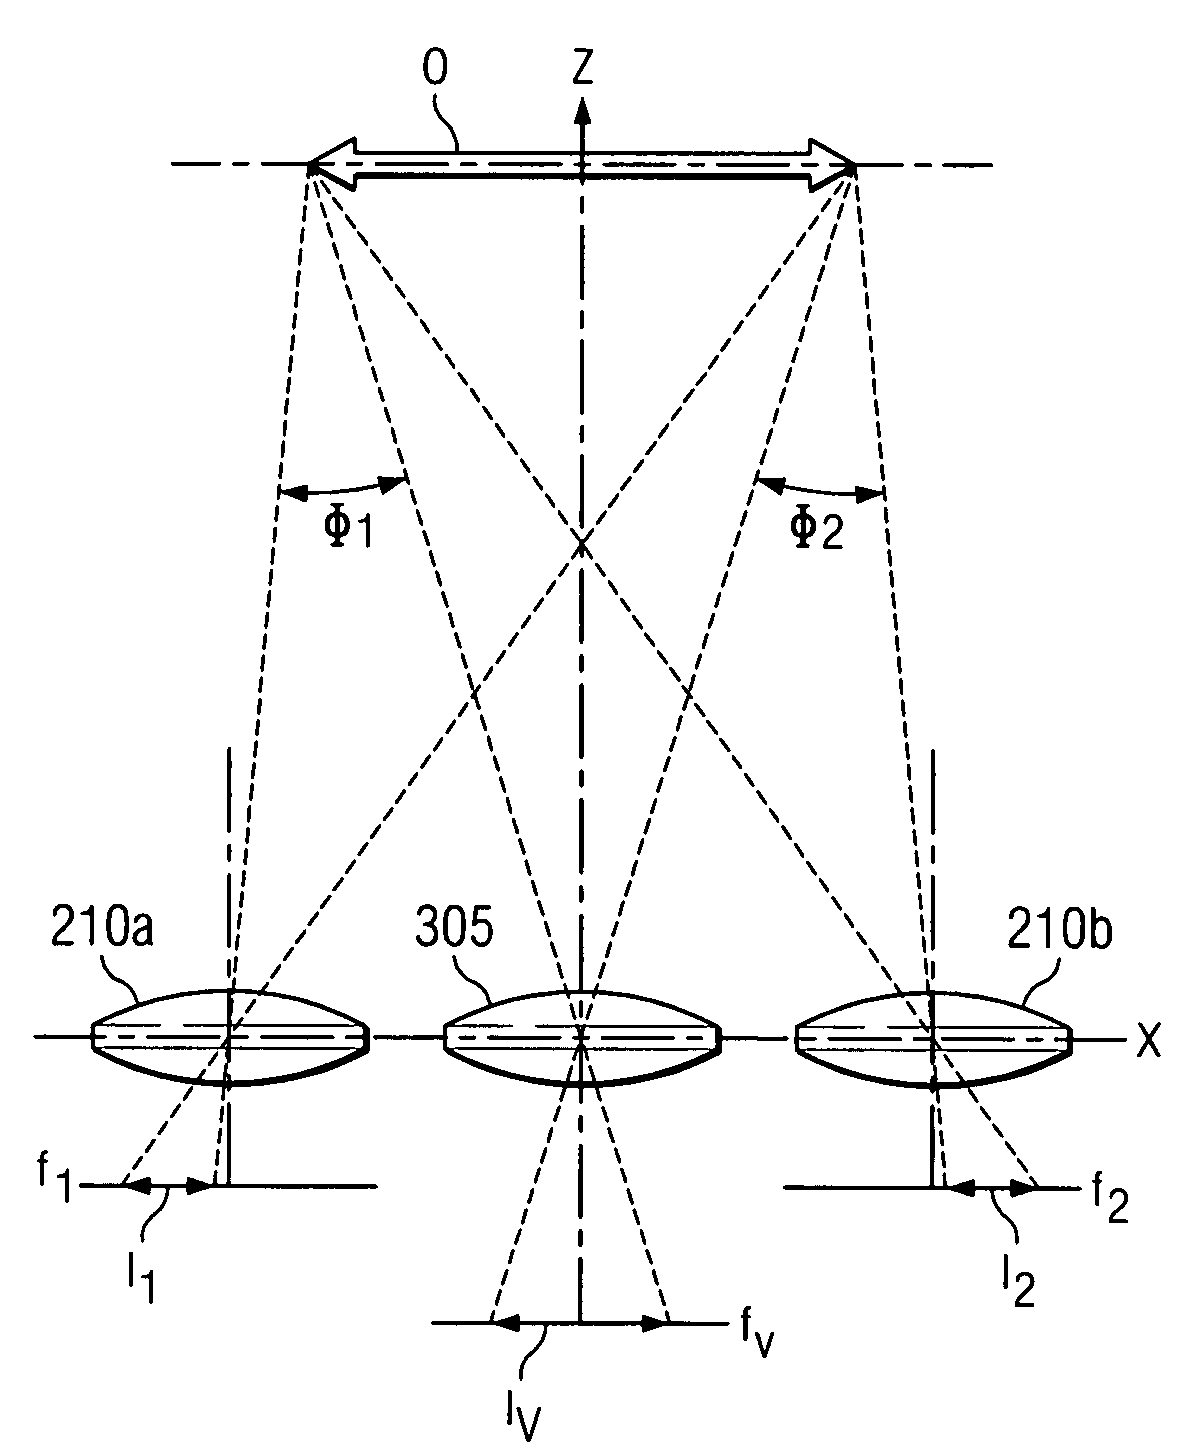 Compound camera and methods for implementing auto-focus, depth-of-field and high-resolution functions